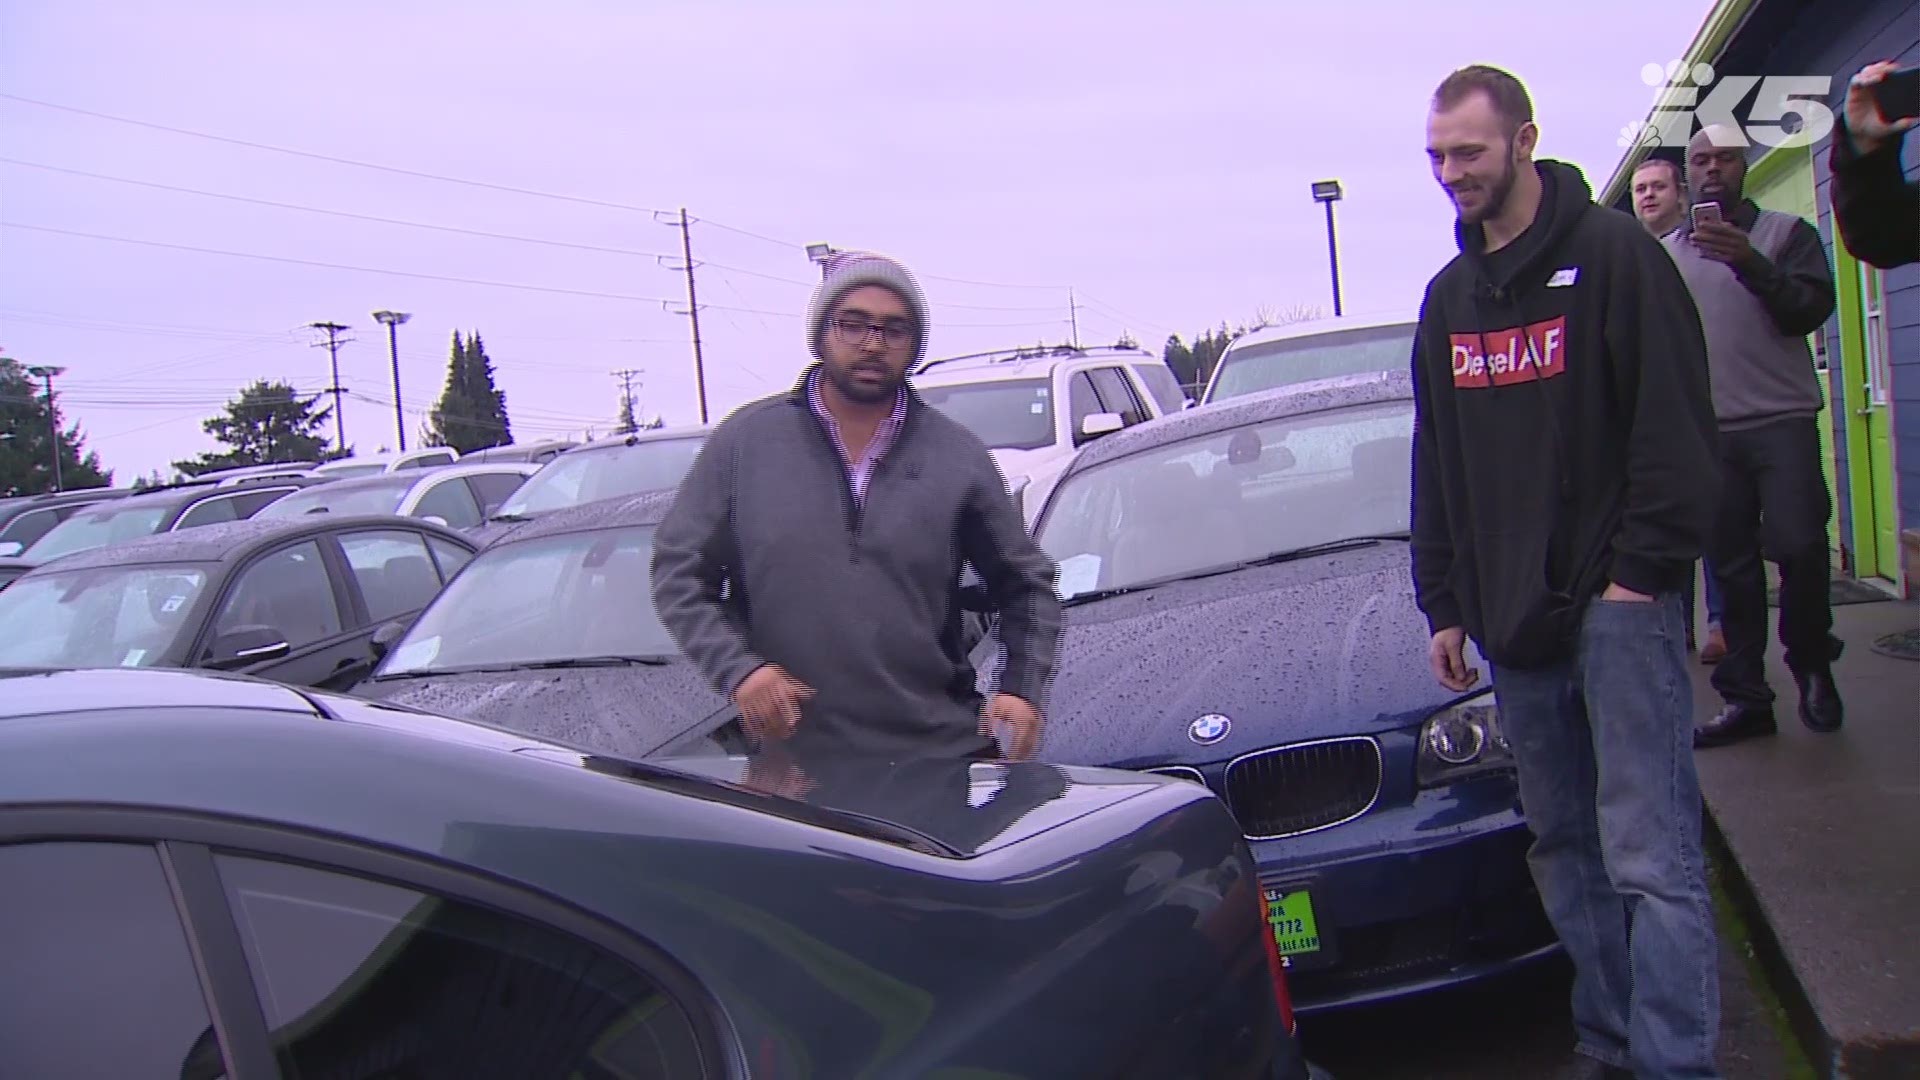 An auto dealership gave a BMW to a good Samaritan who drove his burning car out of a hospital parking garage.